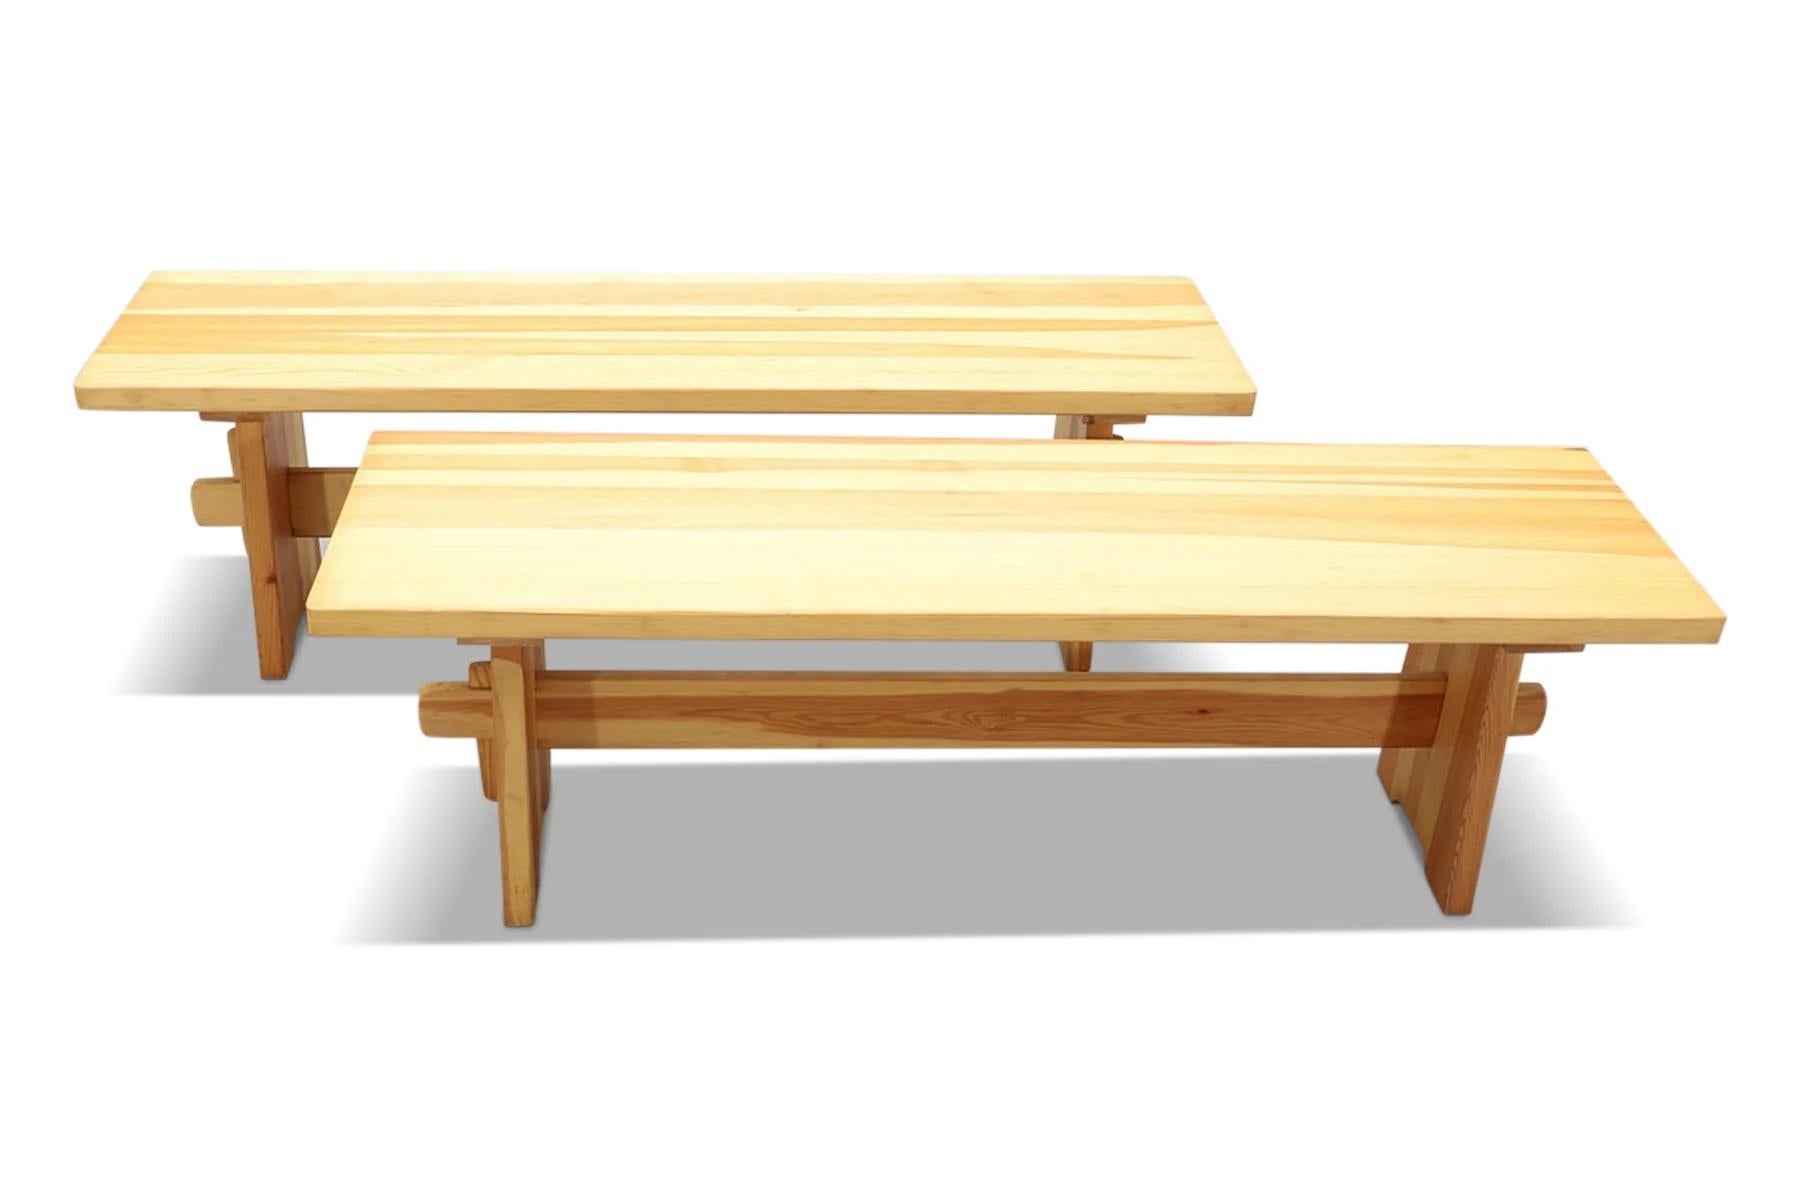 Pair of 1970s solid pine swedish benches #2 In Good Condition For Sale In Berkeley, CA